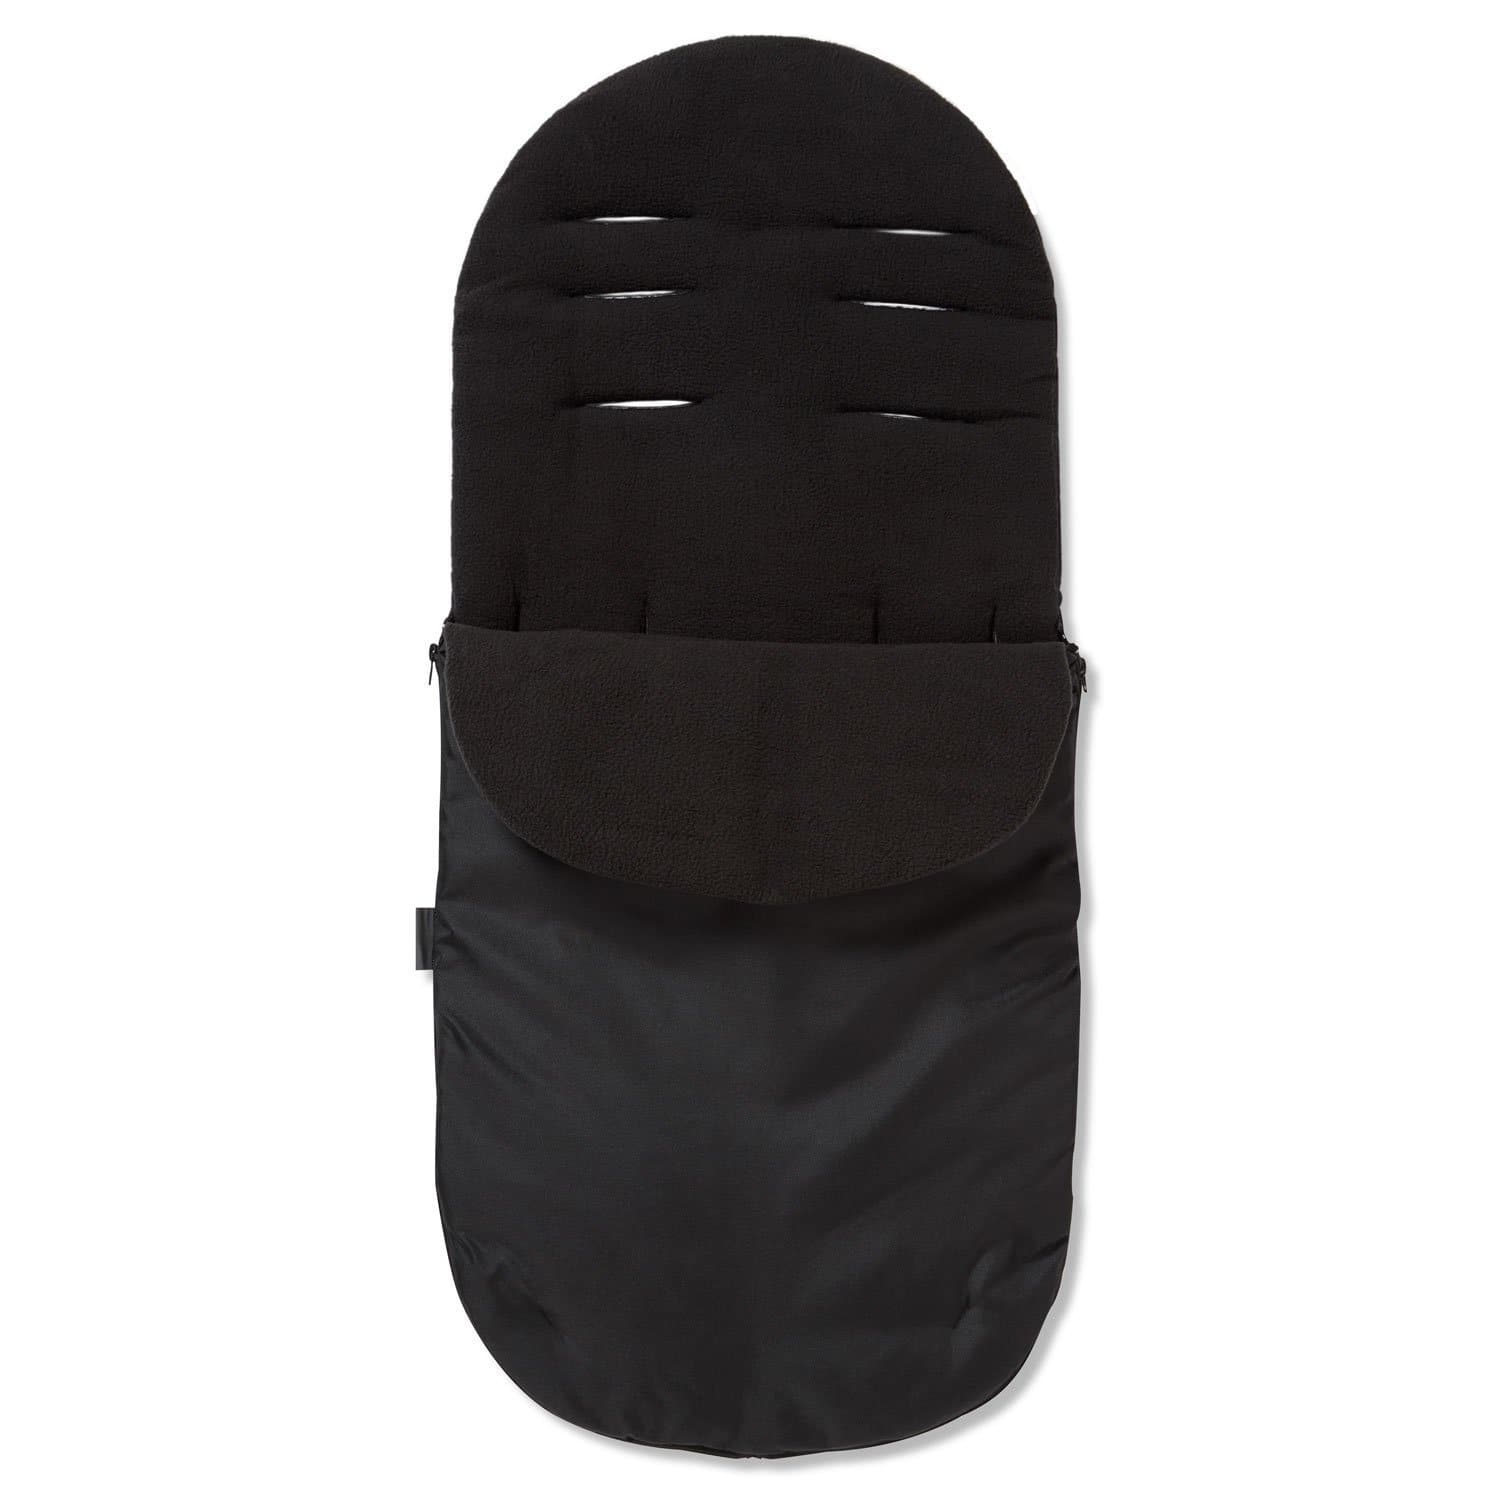 Footmuff / Cosy Toes Compatible with Joolz - Black / Fits All Models | For Your Little One